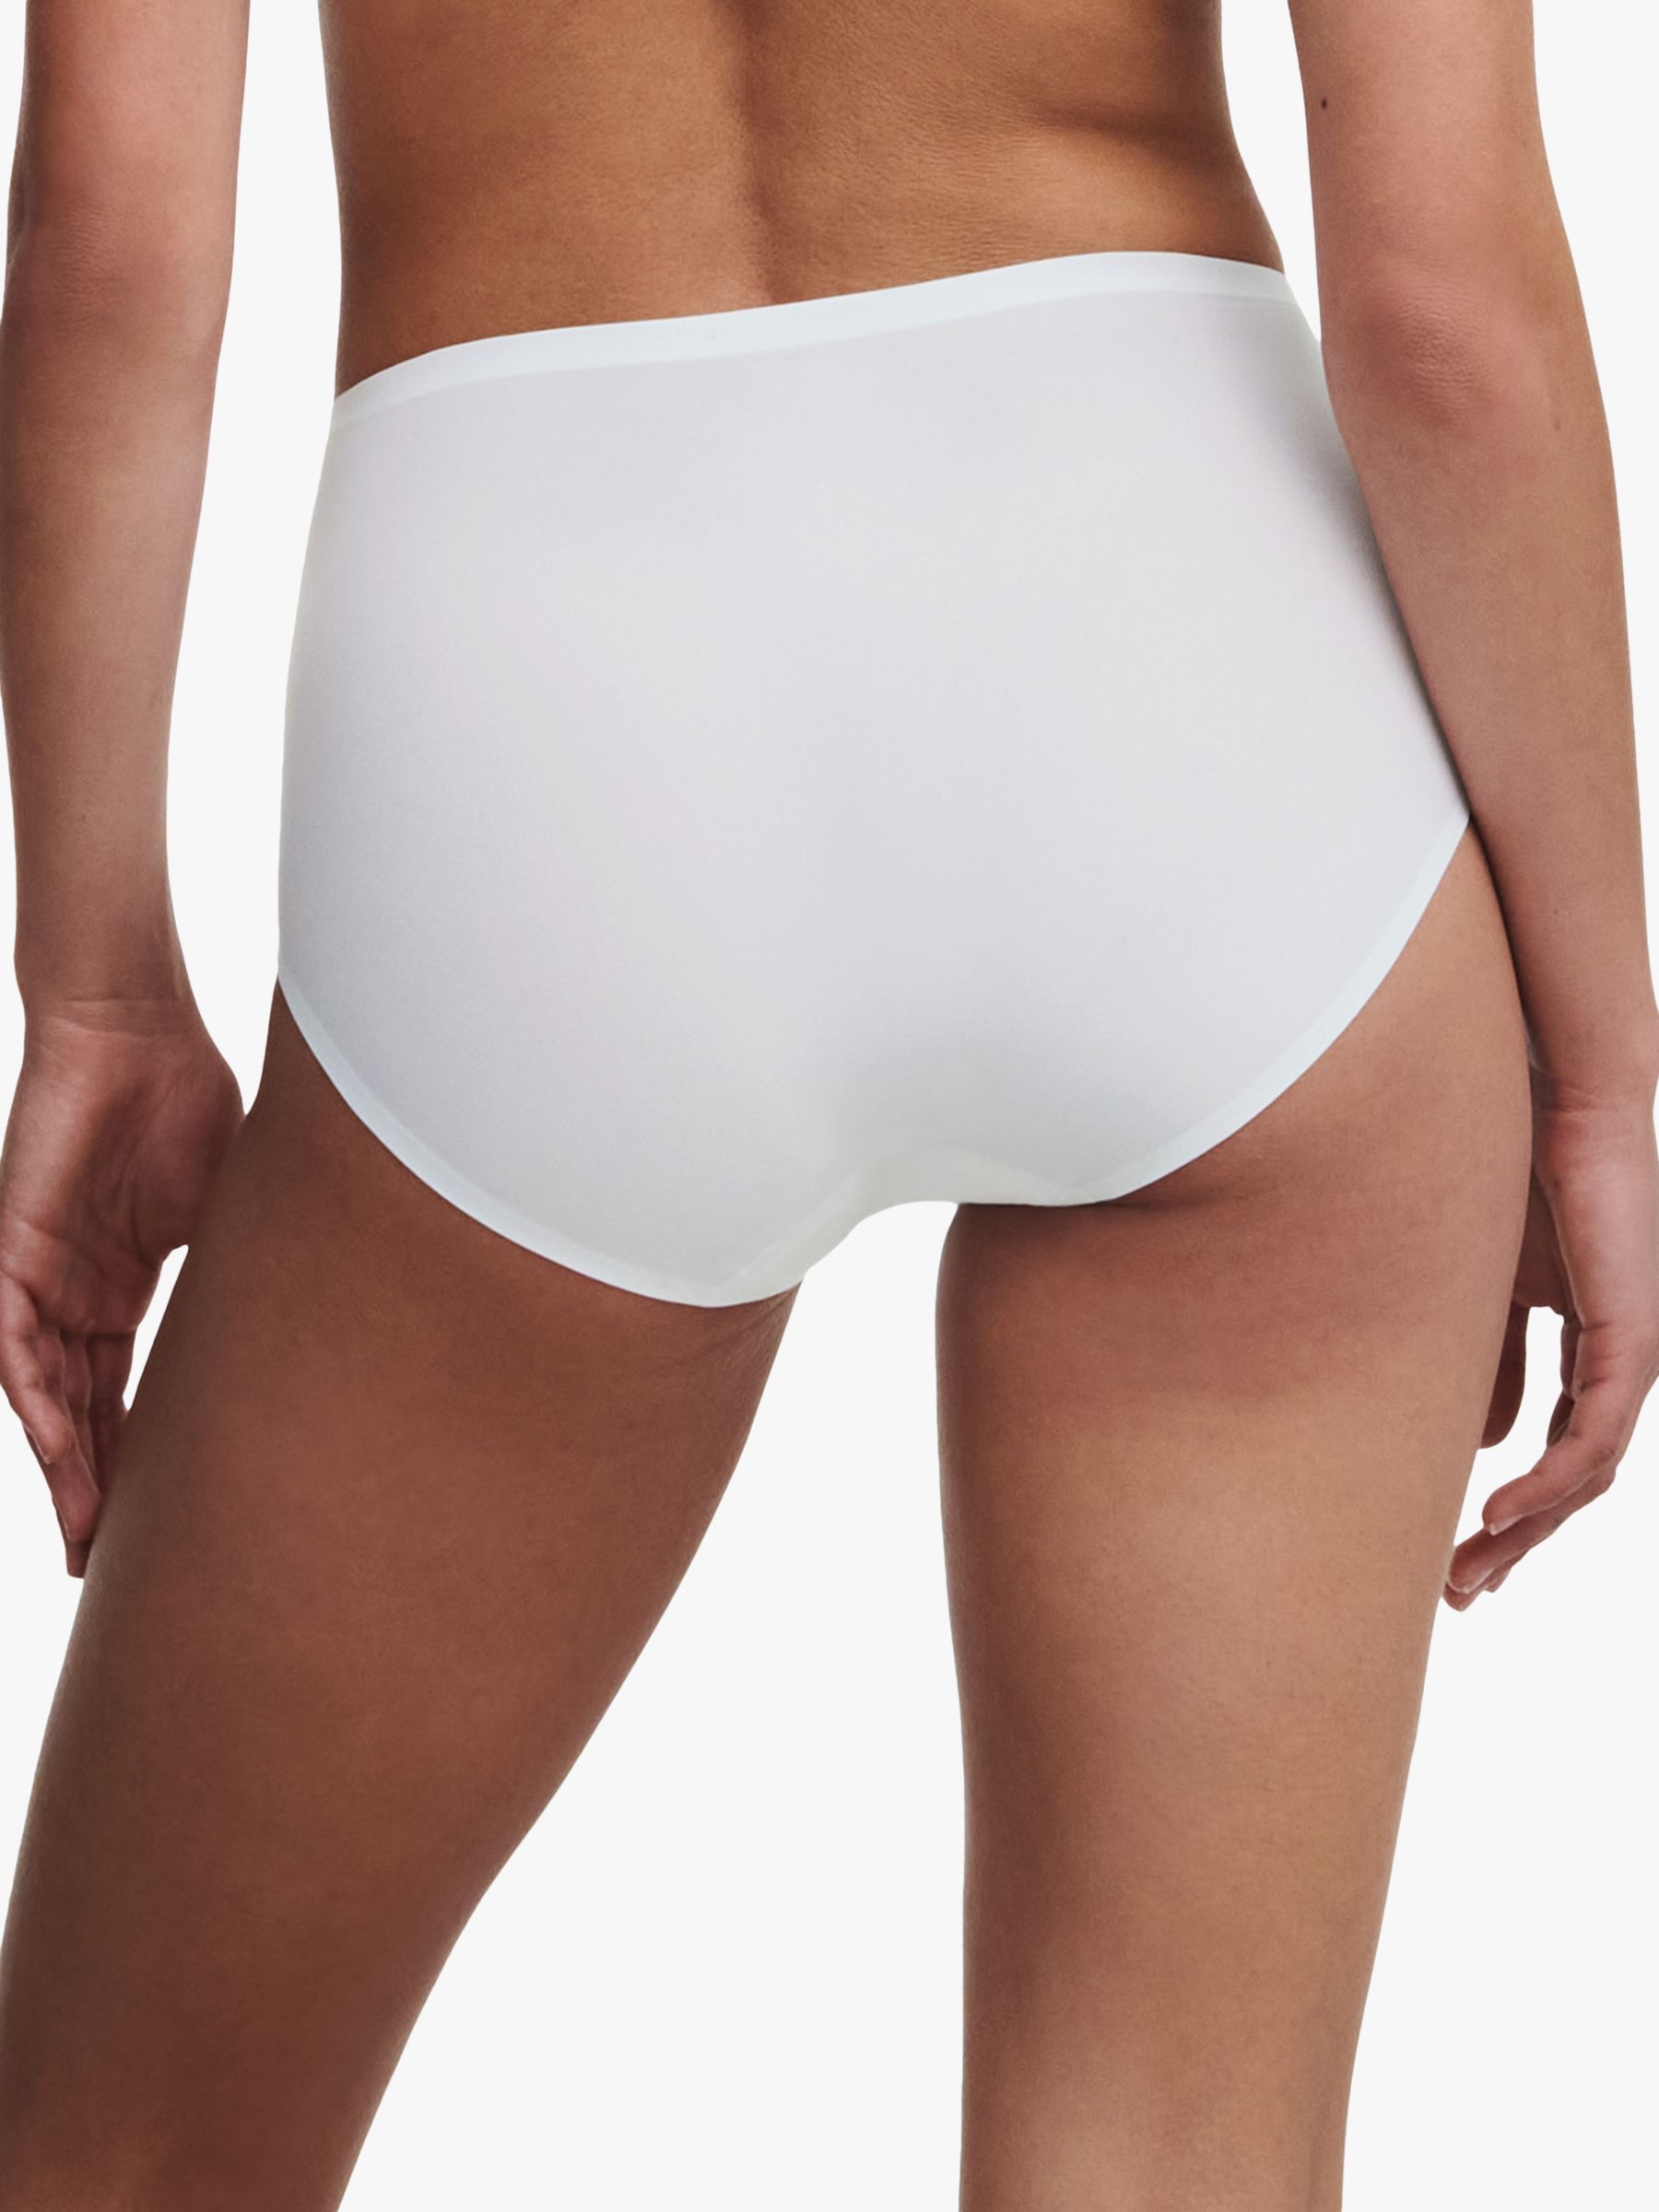 Chantelle Soft Stretch High Waisted Knickers, White, One Size